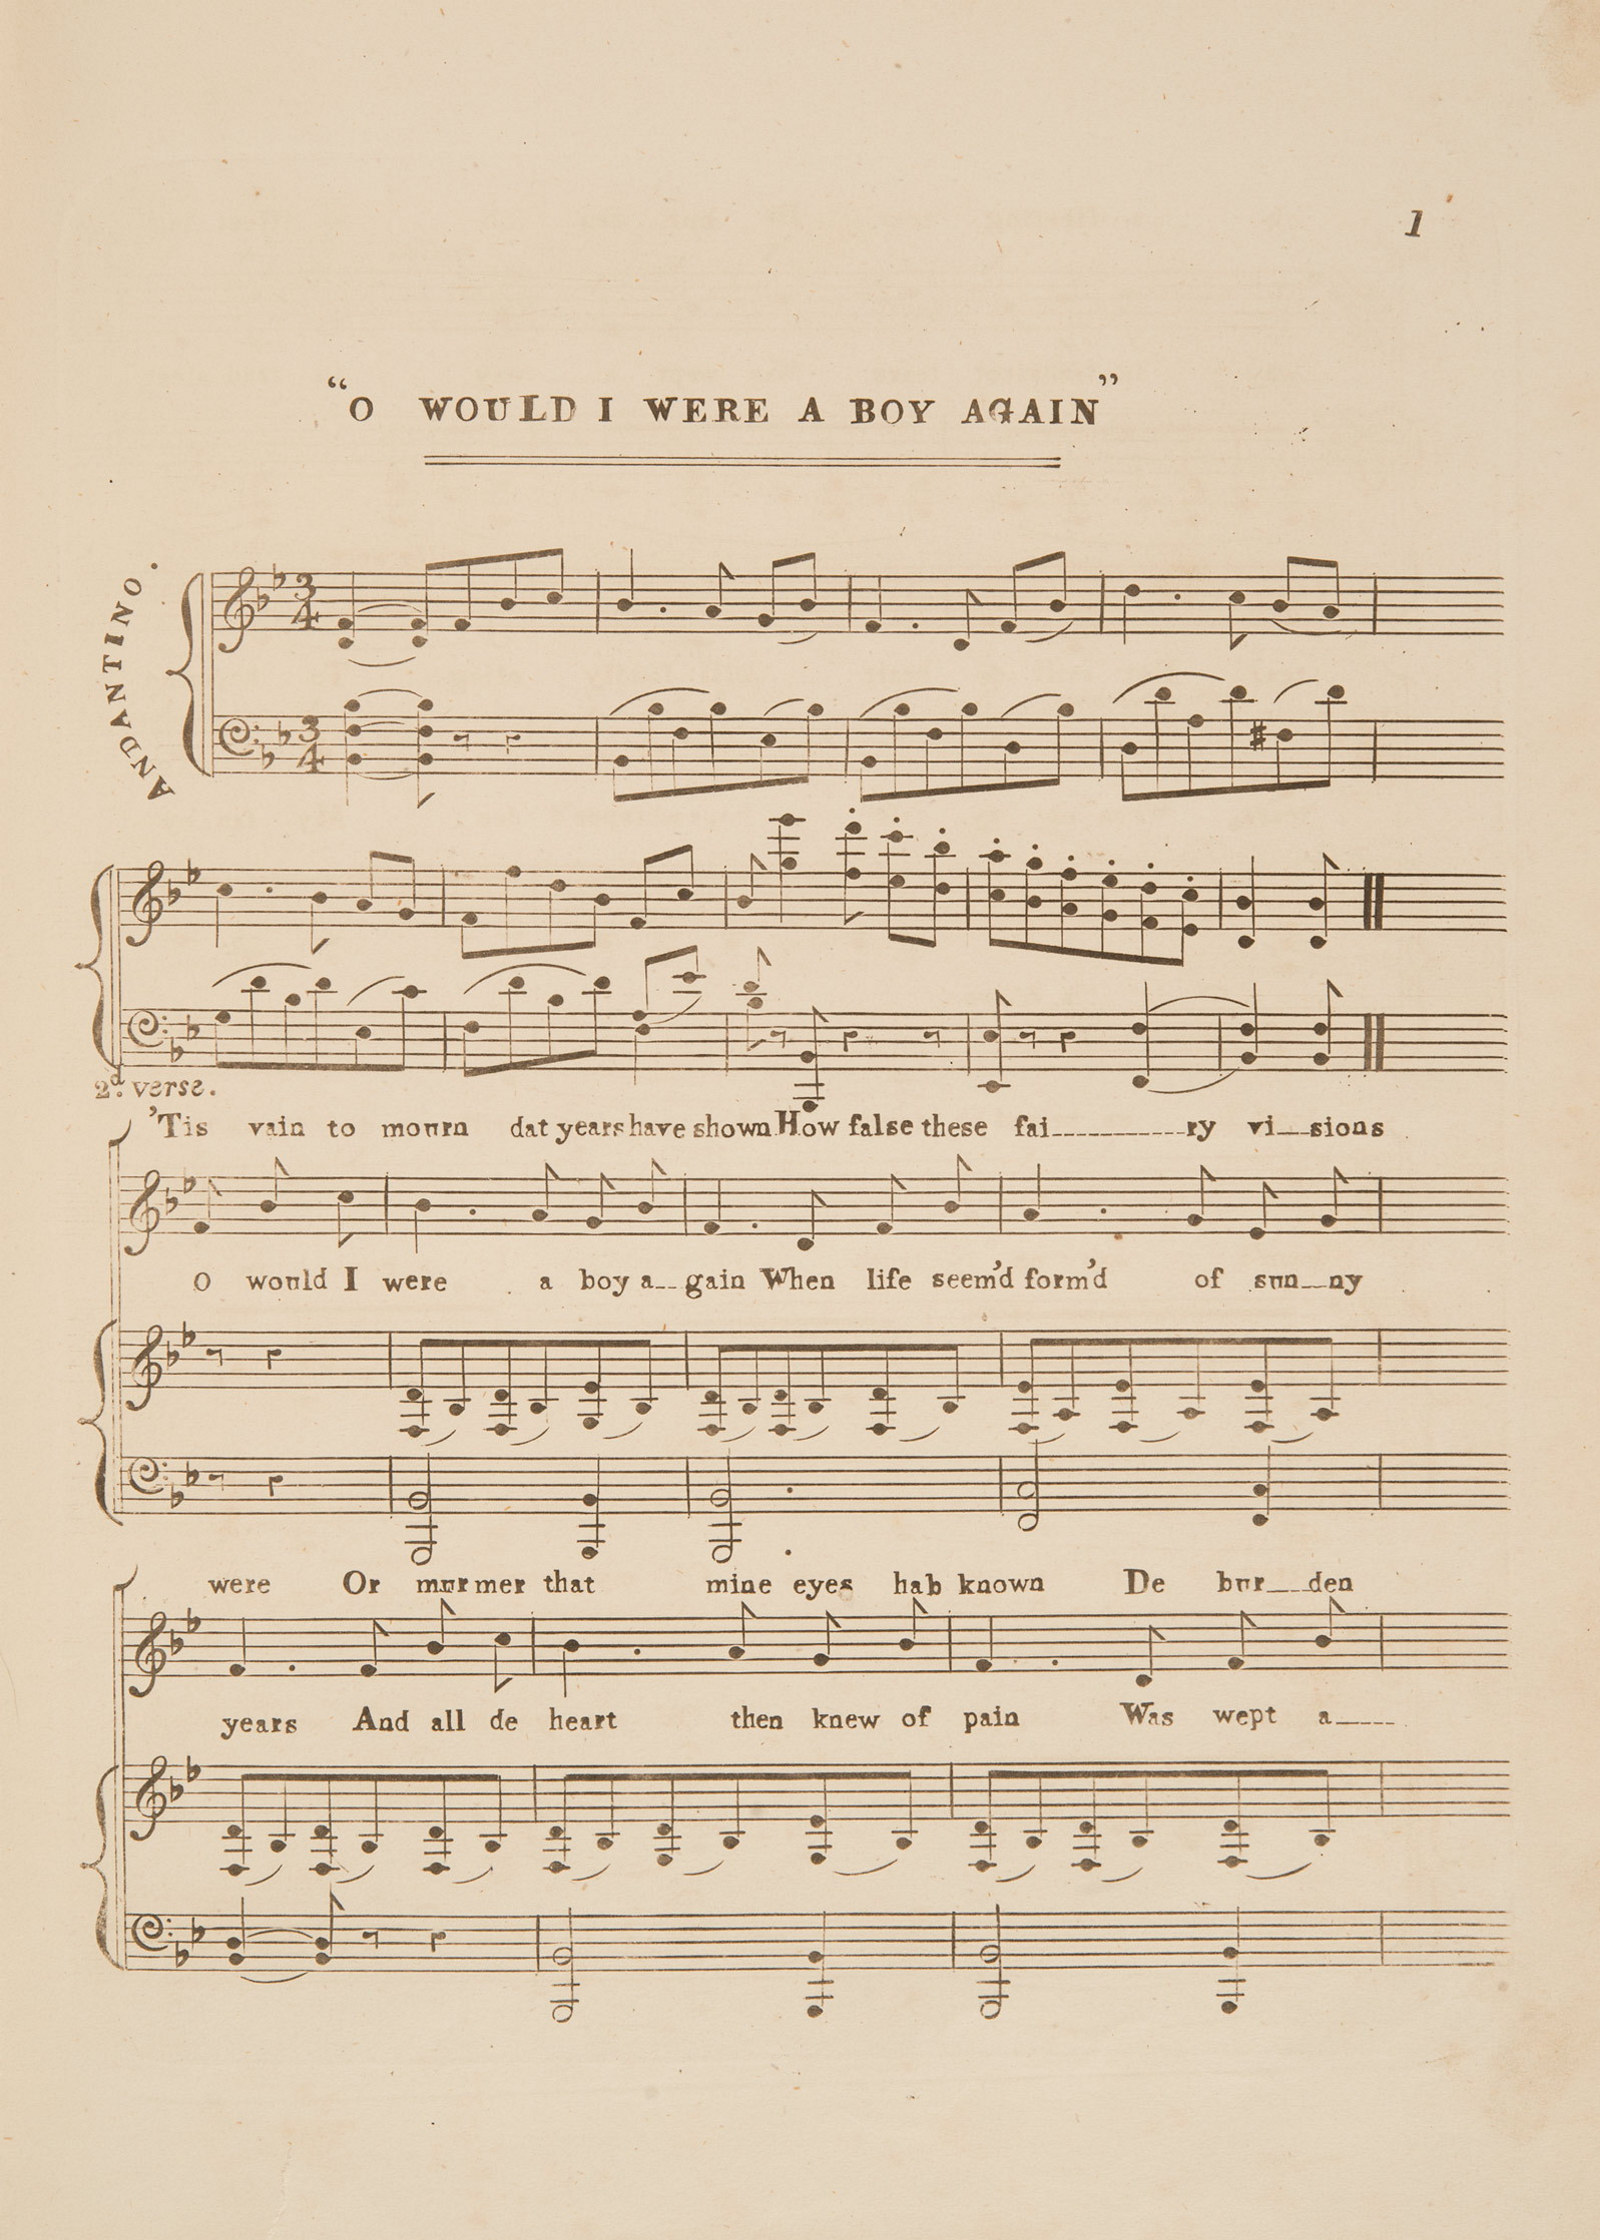 Sheet music, 'O, would I were a Boy again' by Frank Romer, page 1, published circa 1854